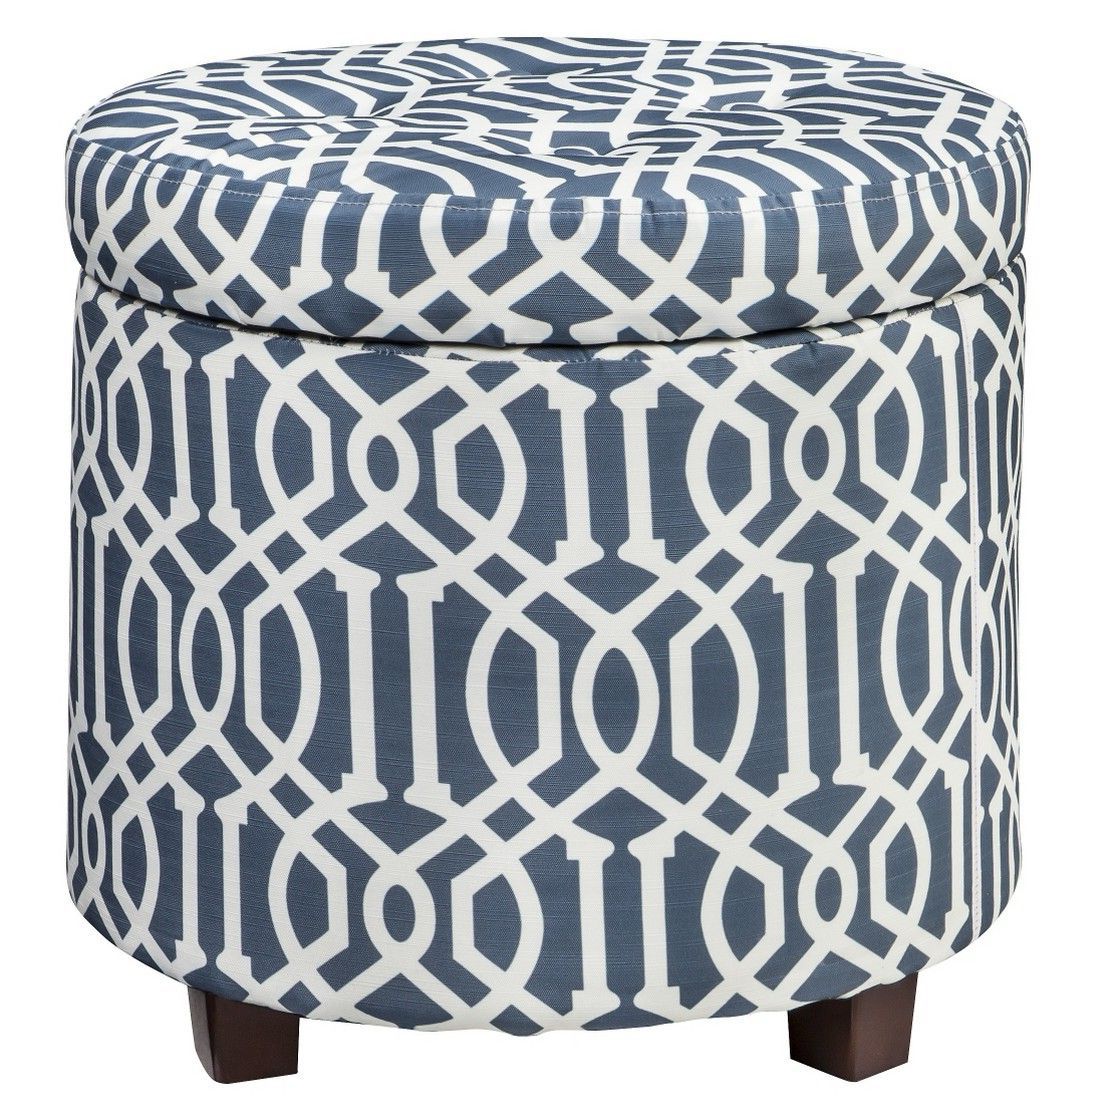 Most Up To Date Threshold™ Round Tufted Storage Ottoman – Blue/white Trellis (View 3 of 10)